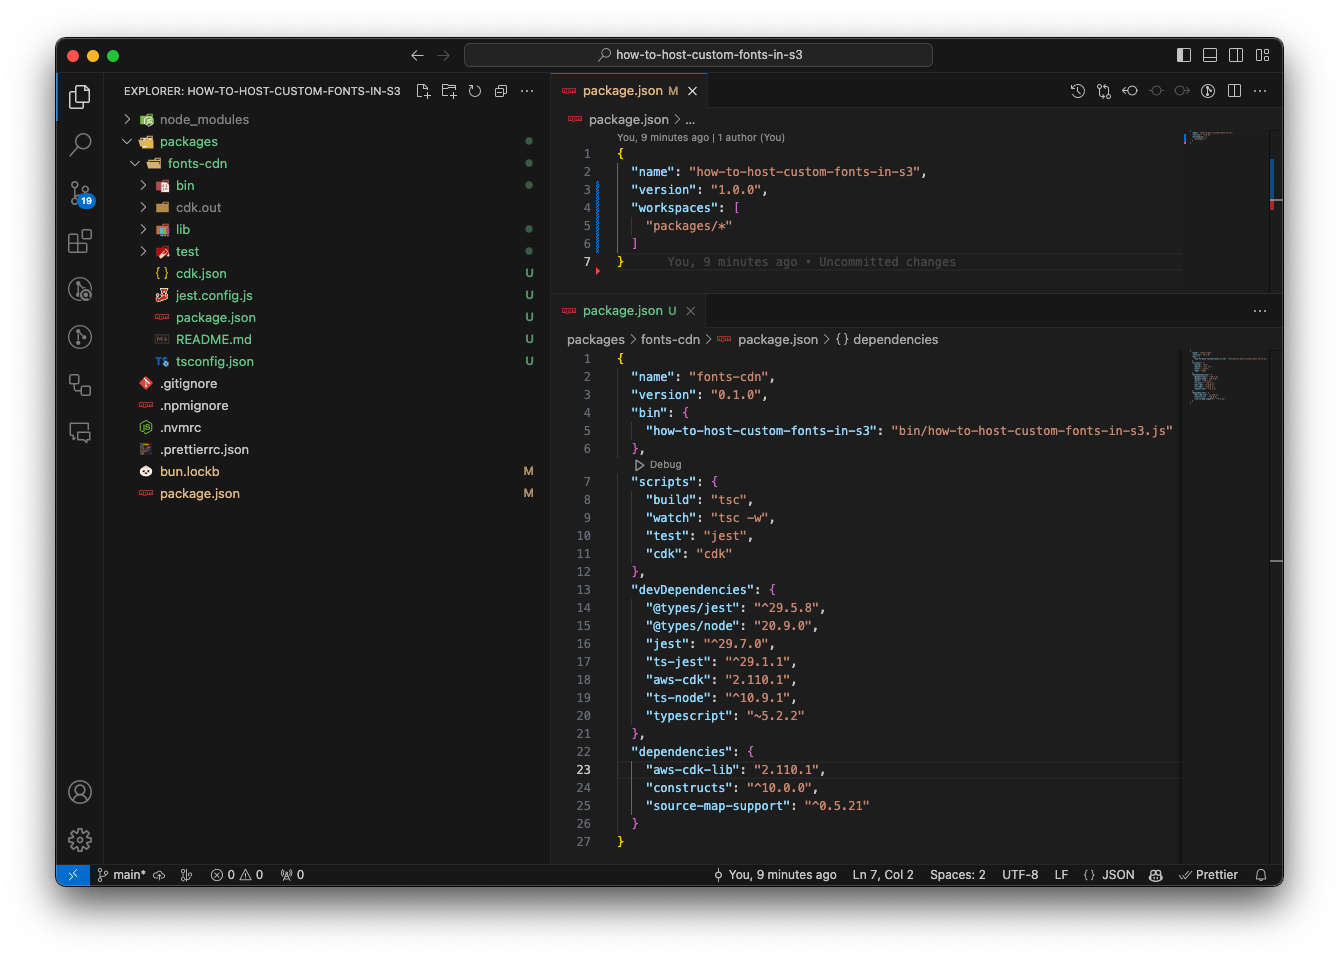 Image of VSCode after migrating to a bun monorepo